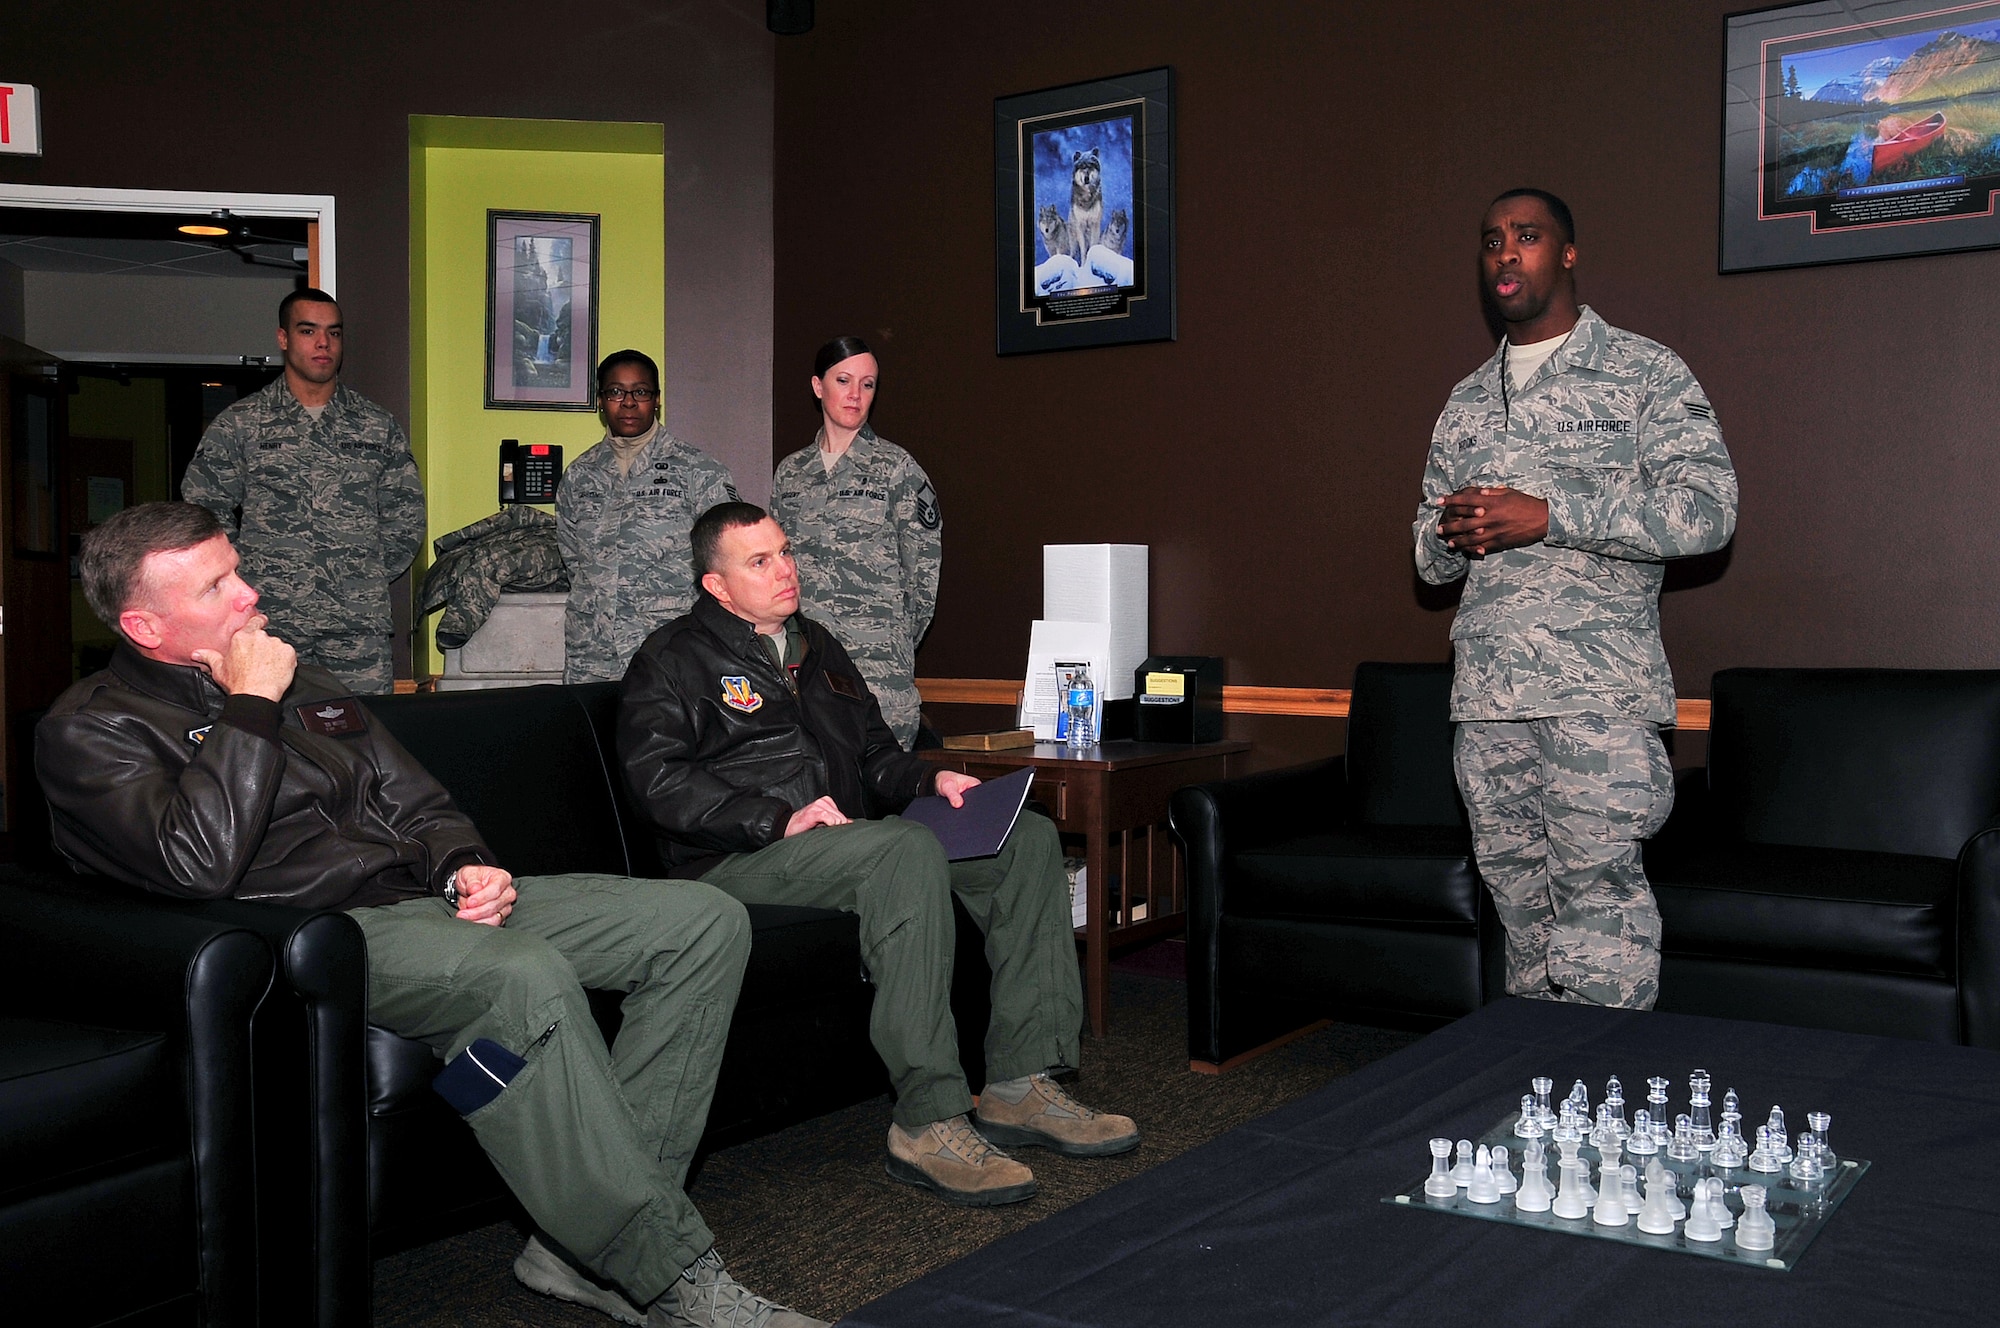 U.S. Air Force Senior Airman Trevon L. Brooks briefs U.S. Air Force Lt. Gen. Tod D. Wolters, 12th Air Force (AFSOUTH) commander (seated, left) on what the base chapel does in support of local airmen. The general toured Tuskegee Hall on Offutt Air Force Base Jan. 9. along with U.S. Air Force Col. Gregory M. Guillot,  55th Wing commander (seated, right). (U.S. Air Force photo by D.P. Heard/Released)